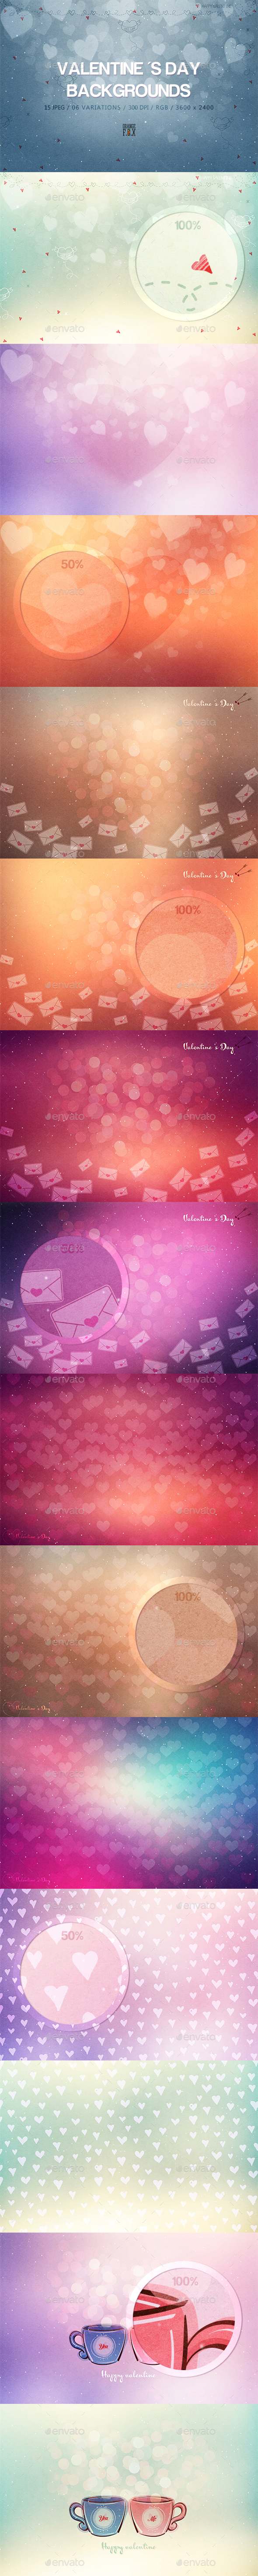 15 Valentine 's Day Backgrounds